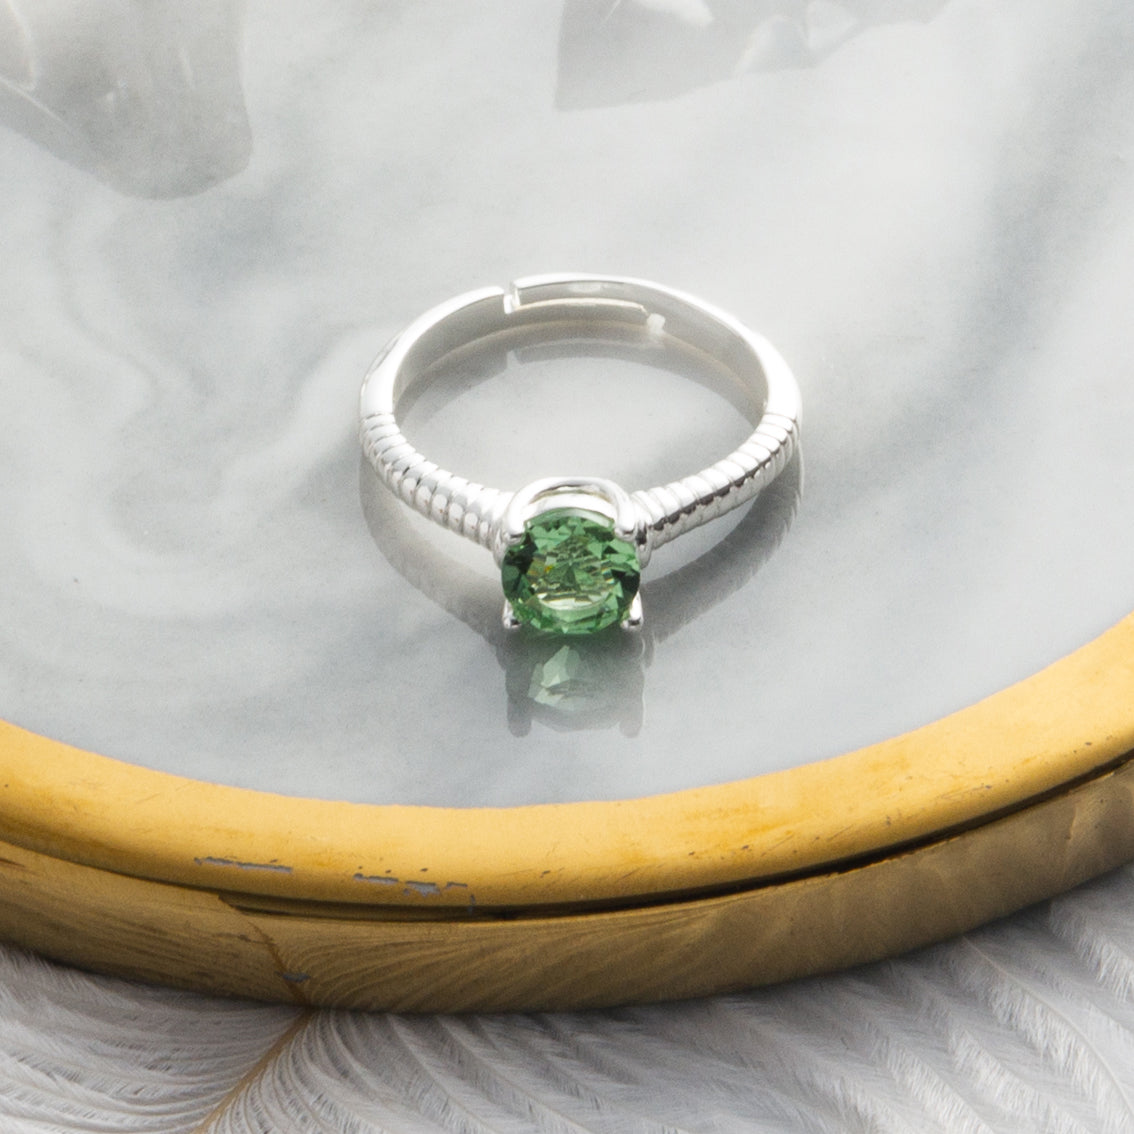 August (Peridot) Adjustable Birthstone Ring Created with Zircondia® Crystals